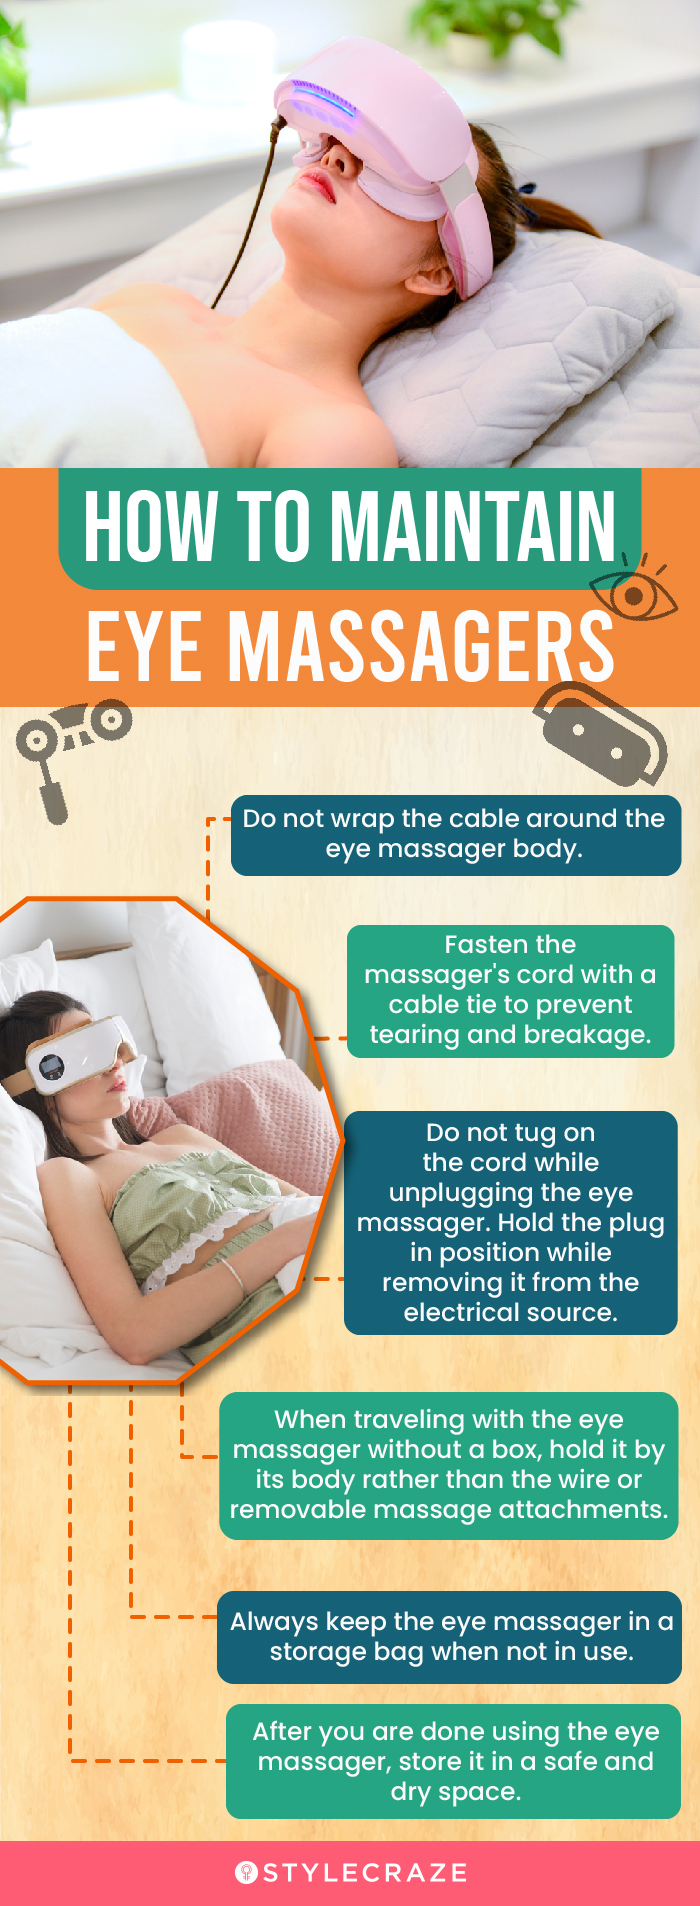 Tips To Maintain Eye Massagers (infographic)